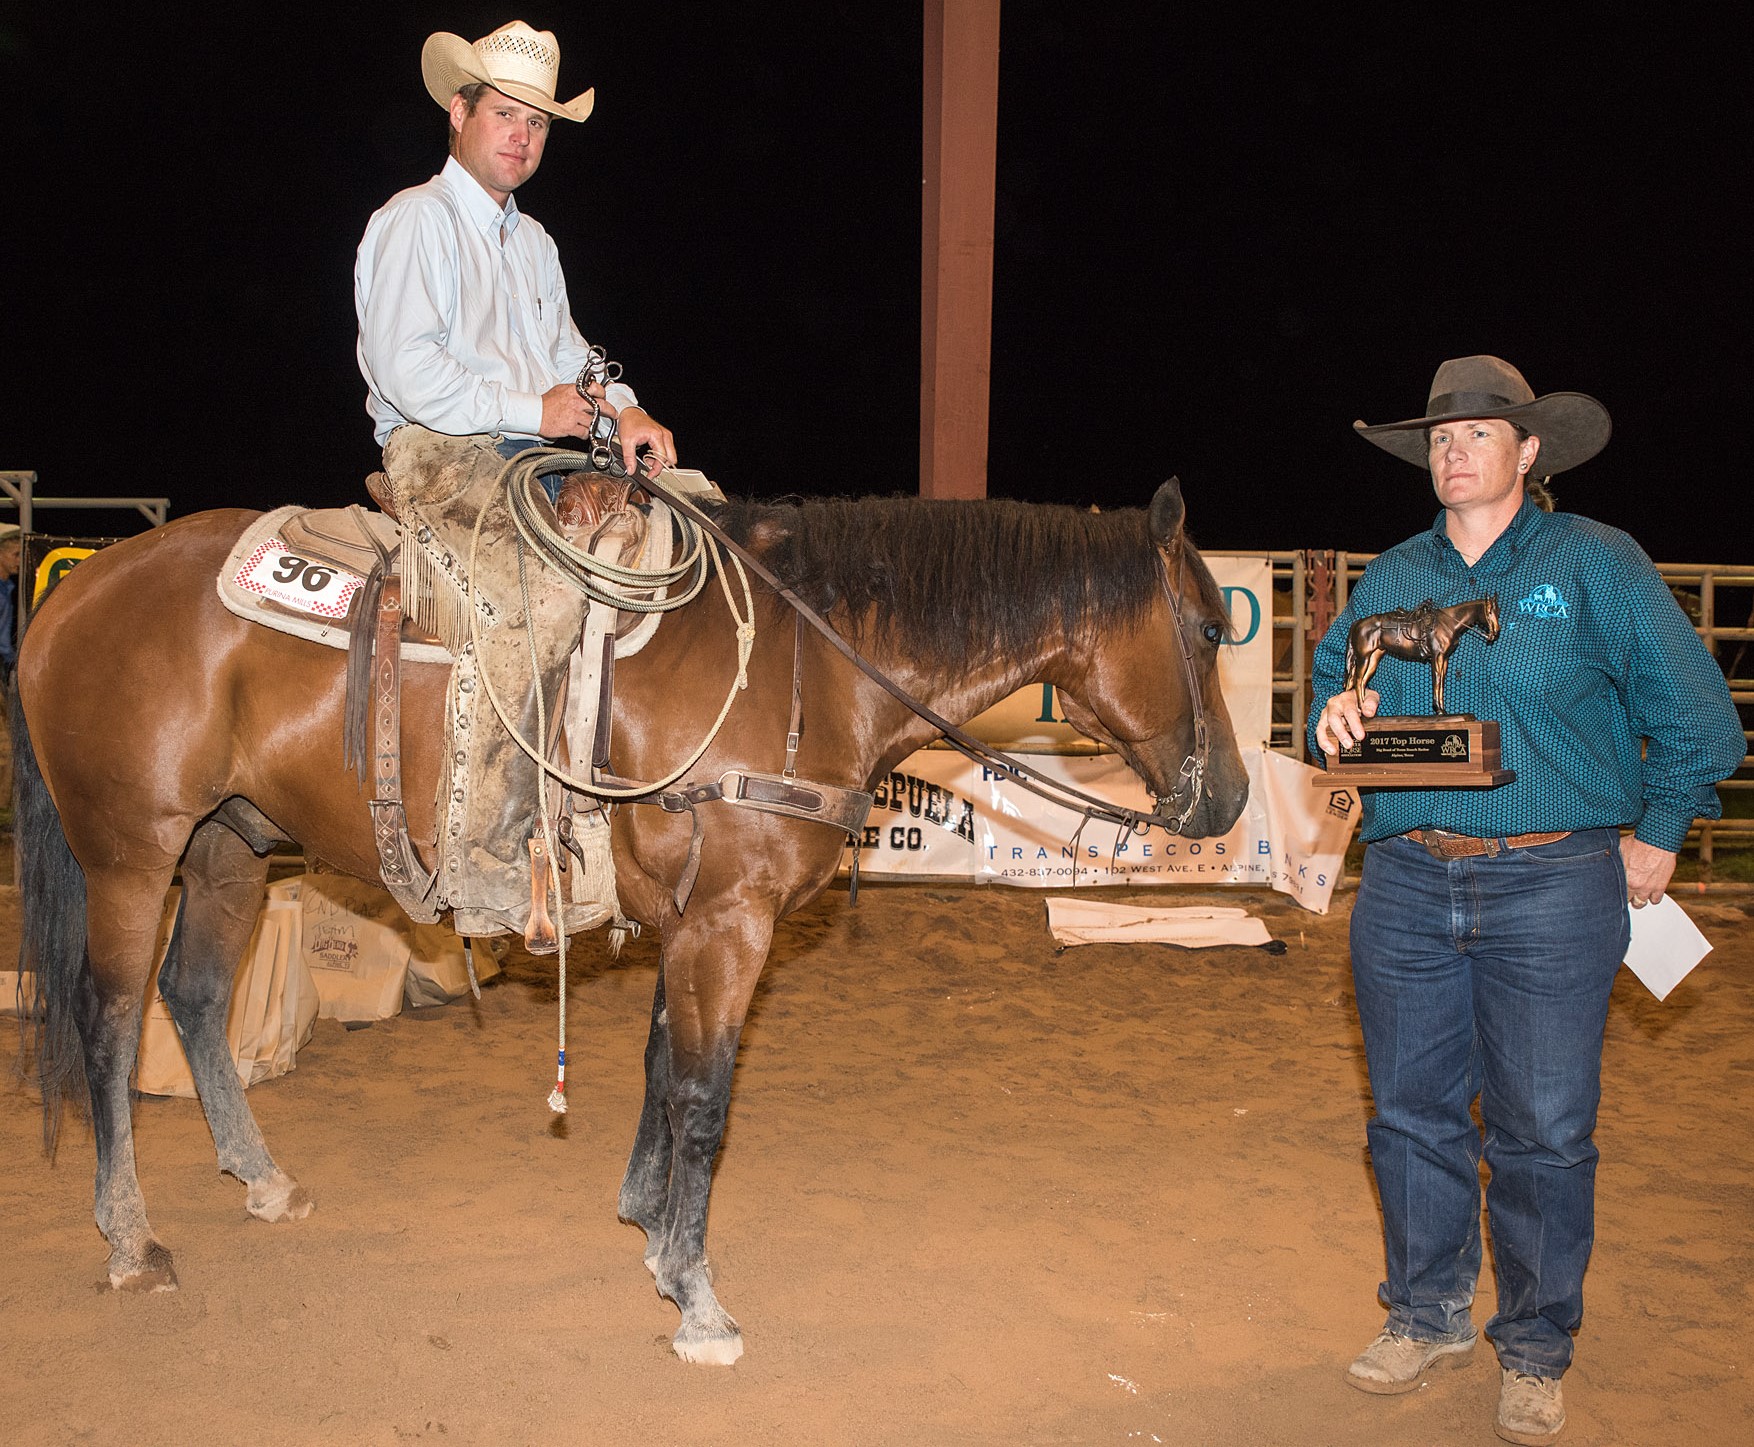 JMP Ethan, Ridden By: Bill Angell, Angell Ranch, Owned by: Angell Ranch - Top Horse - 2017 Big Bend of Texas Ranch Rodeo